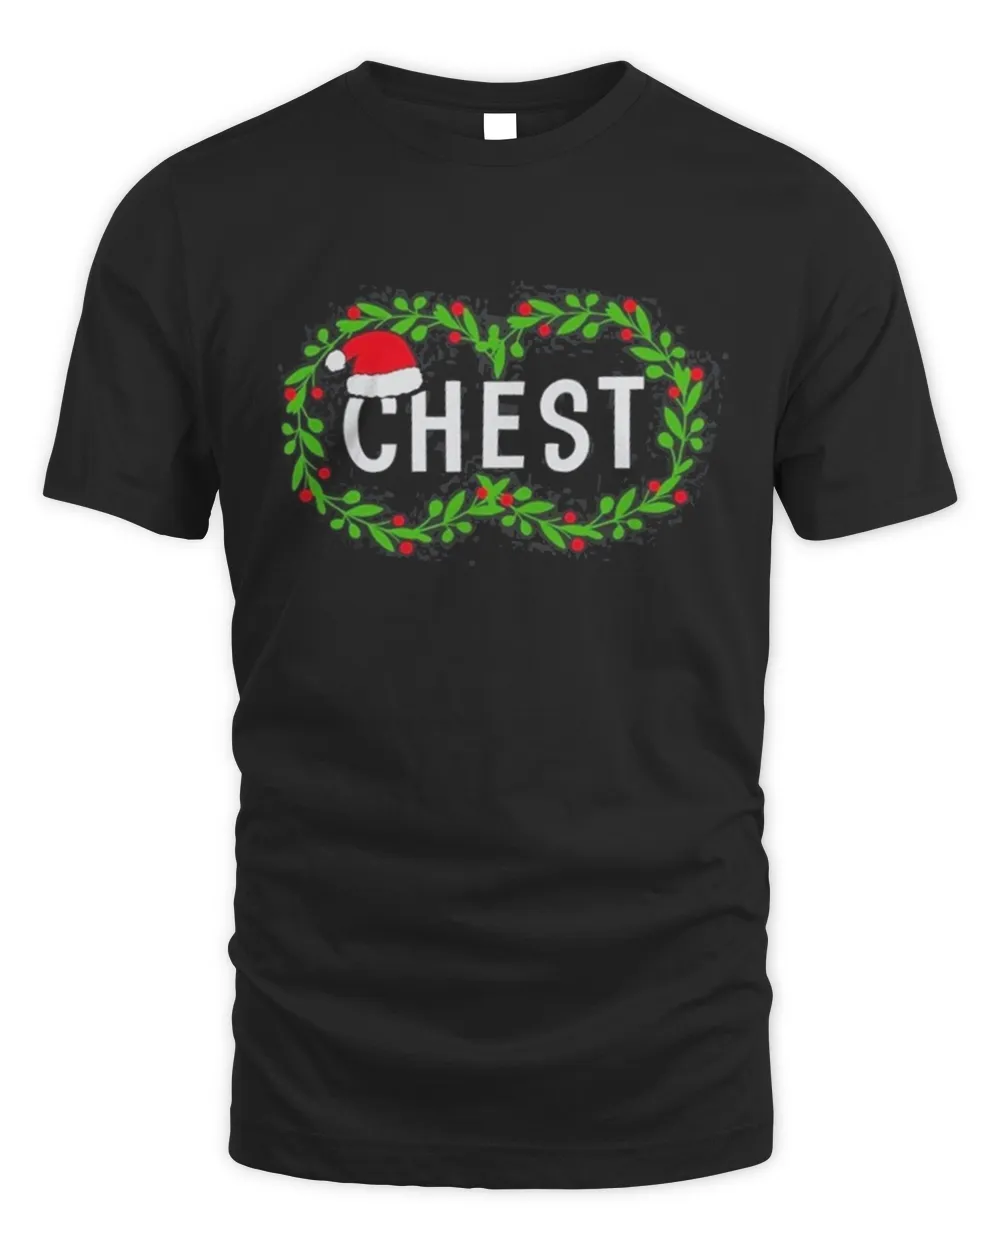 CHEST NUTS CHESTNUTS Matching Christmas Shirt